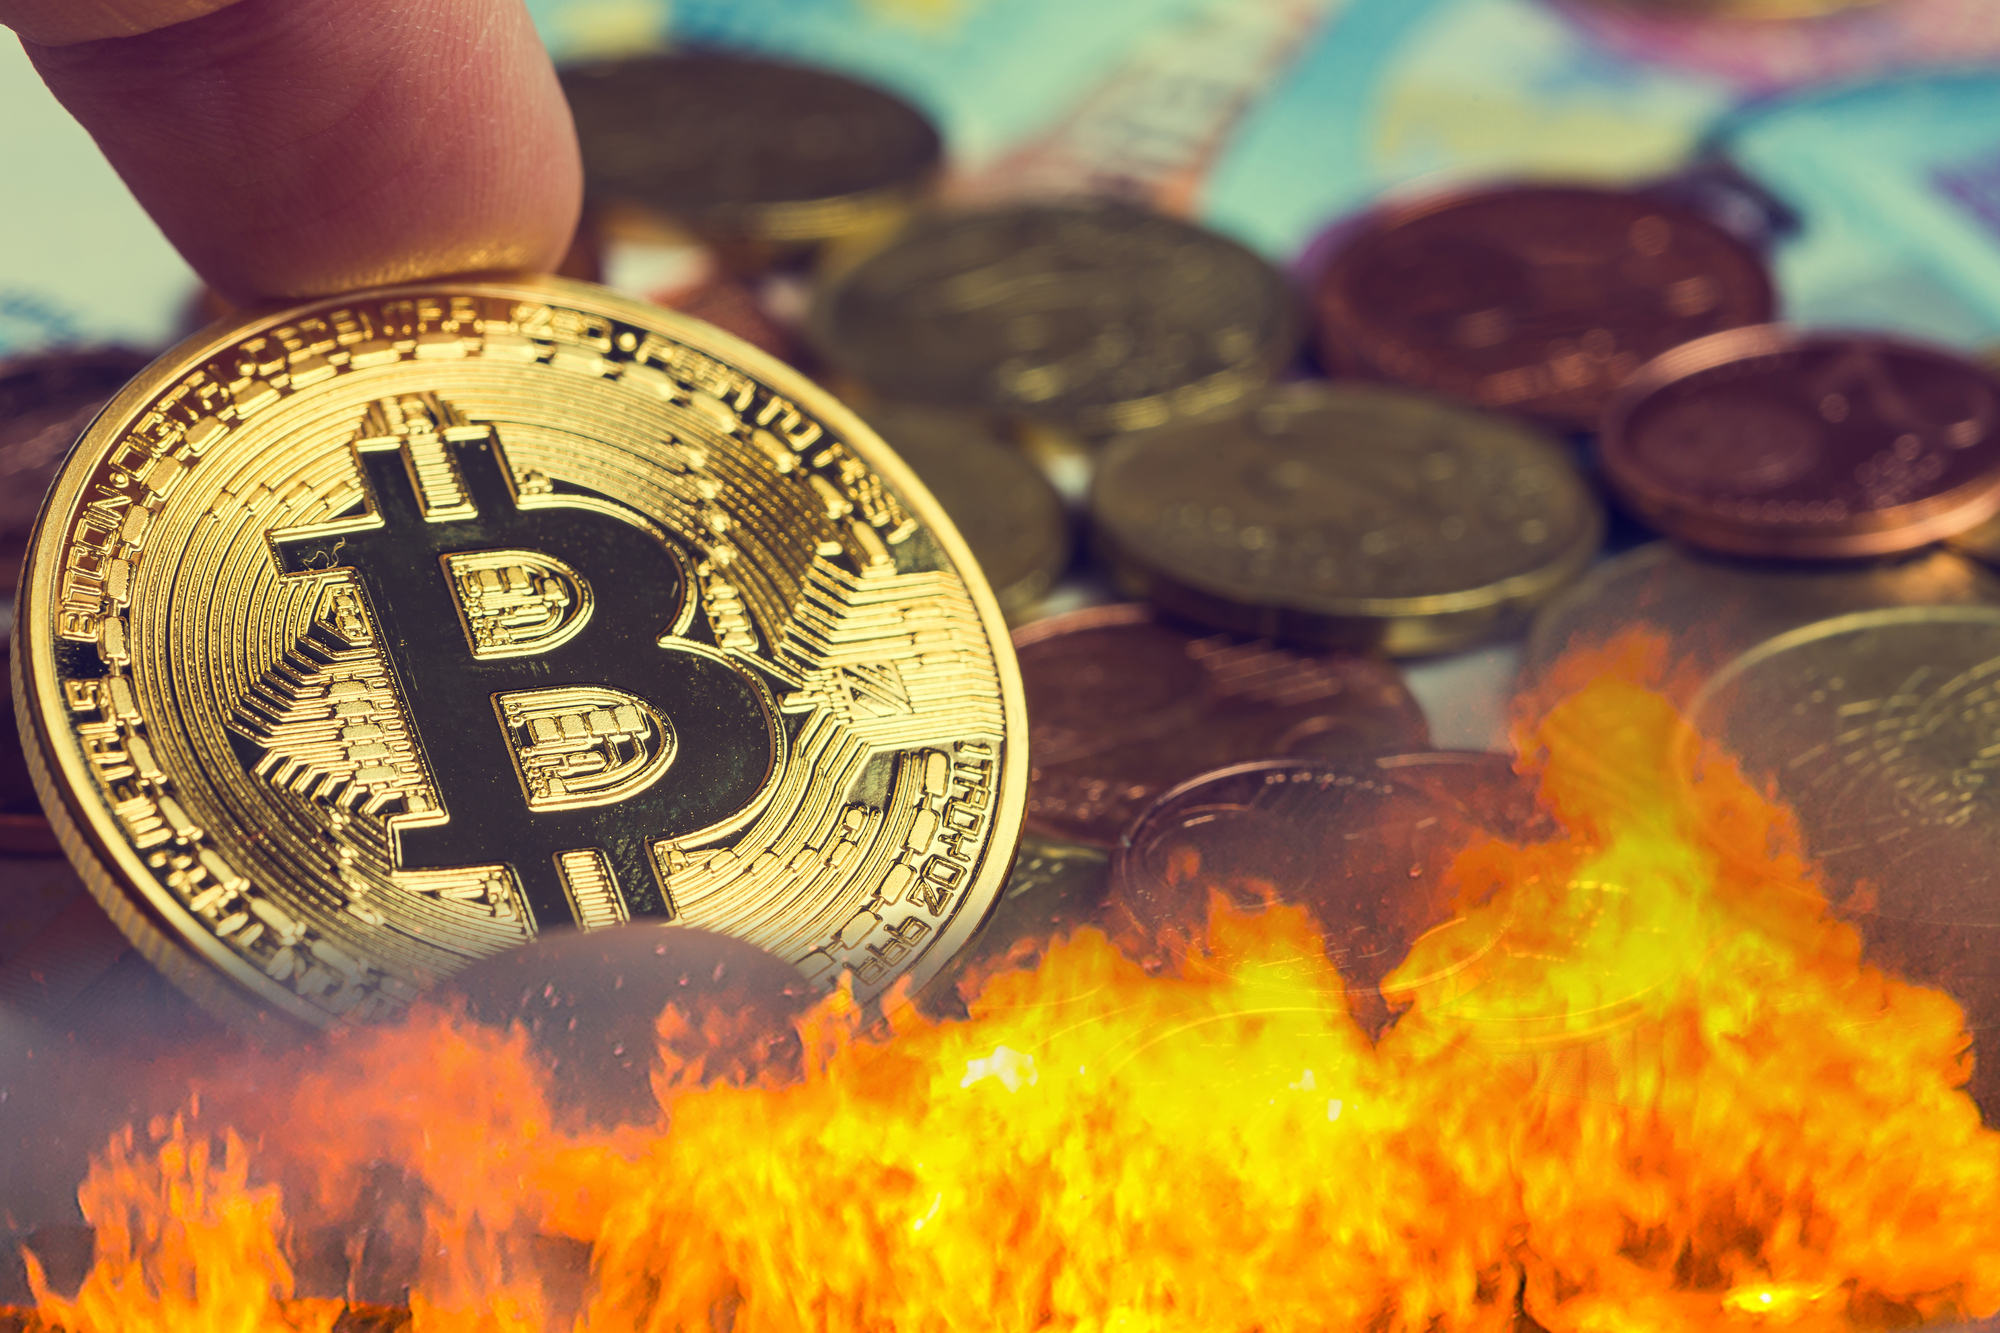 The bitcoin and the Euro and fire